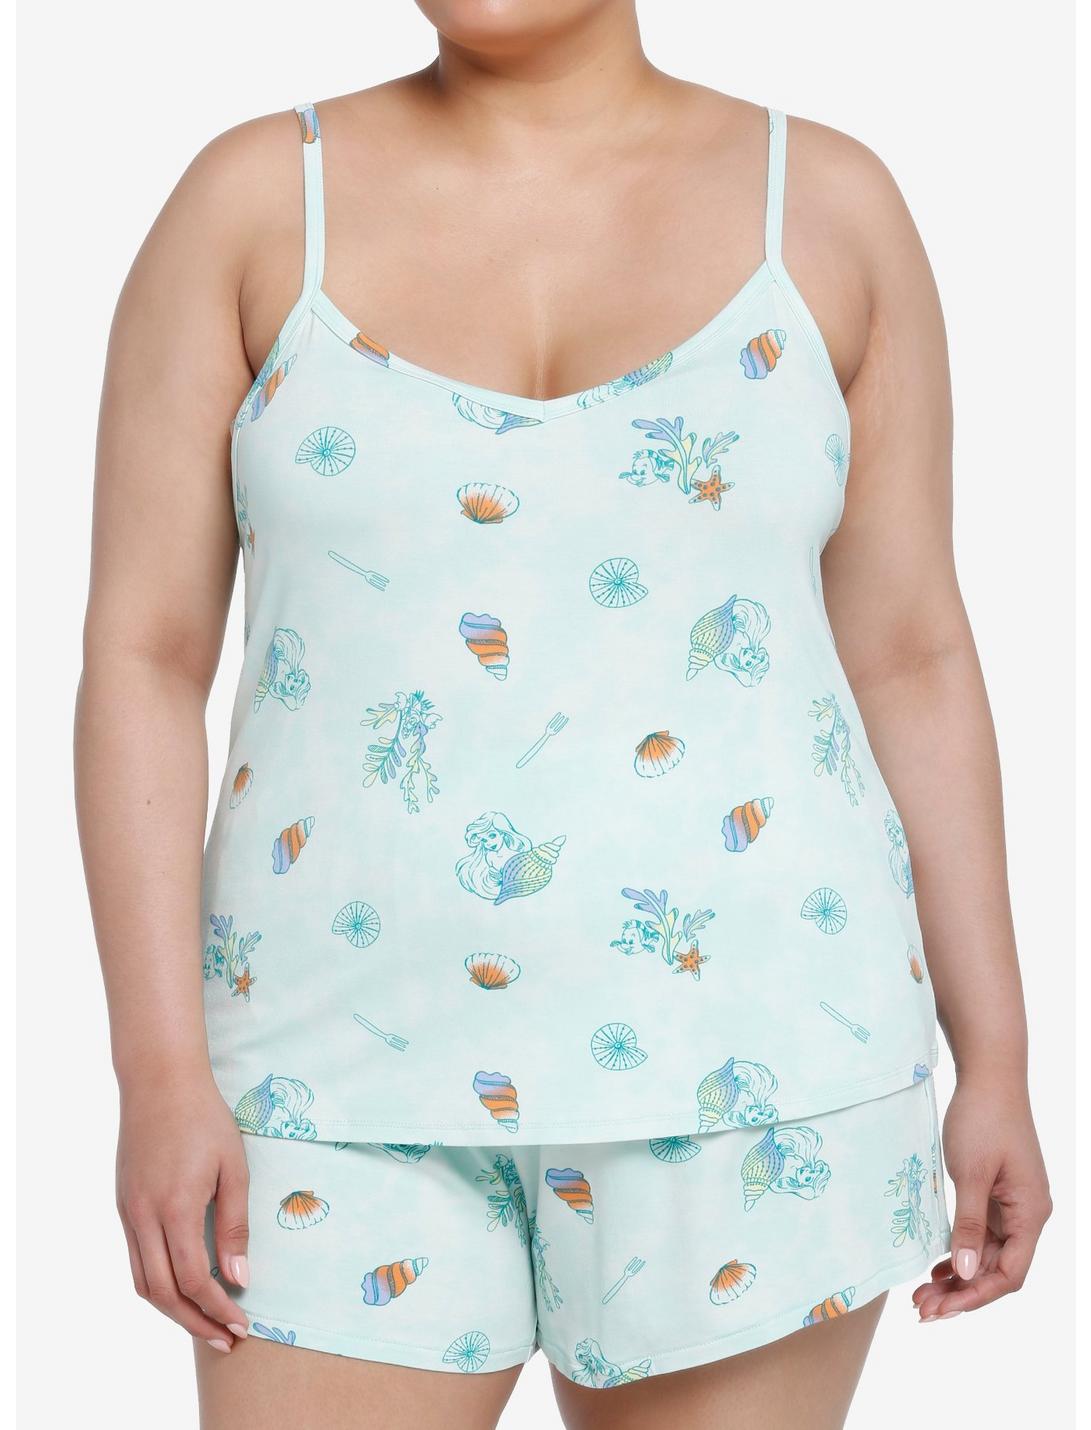 Her Universe Disney The Little Mermaid Icons Lounge Cami Plus Size Her Universe Exclusive, MULTI, hi-res